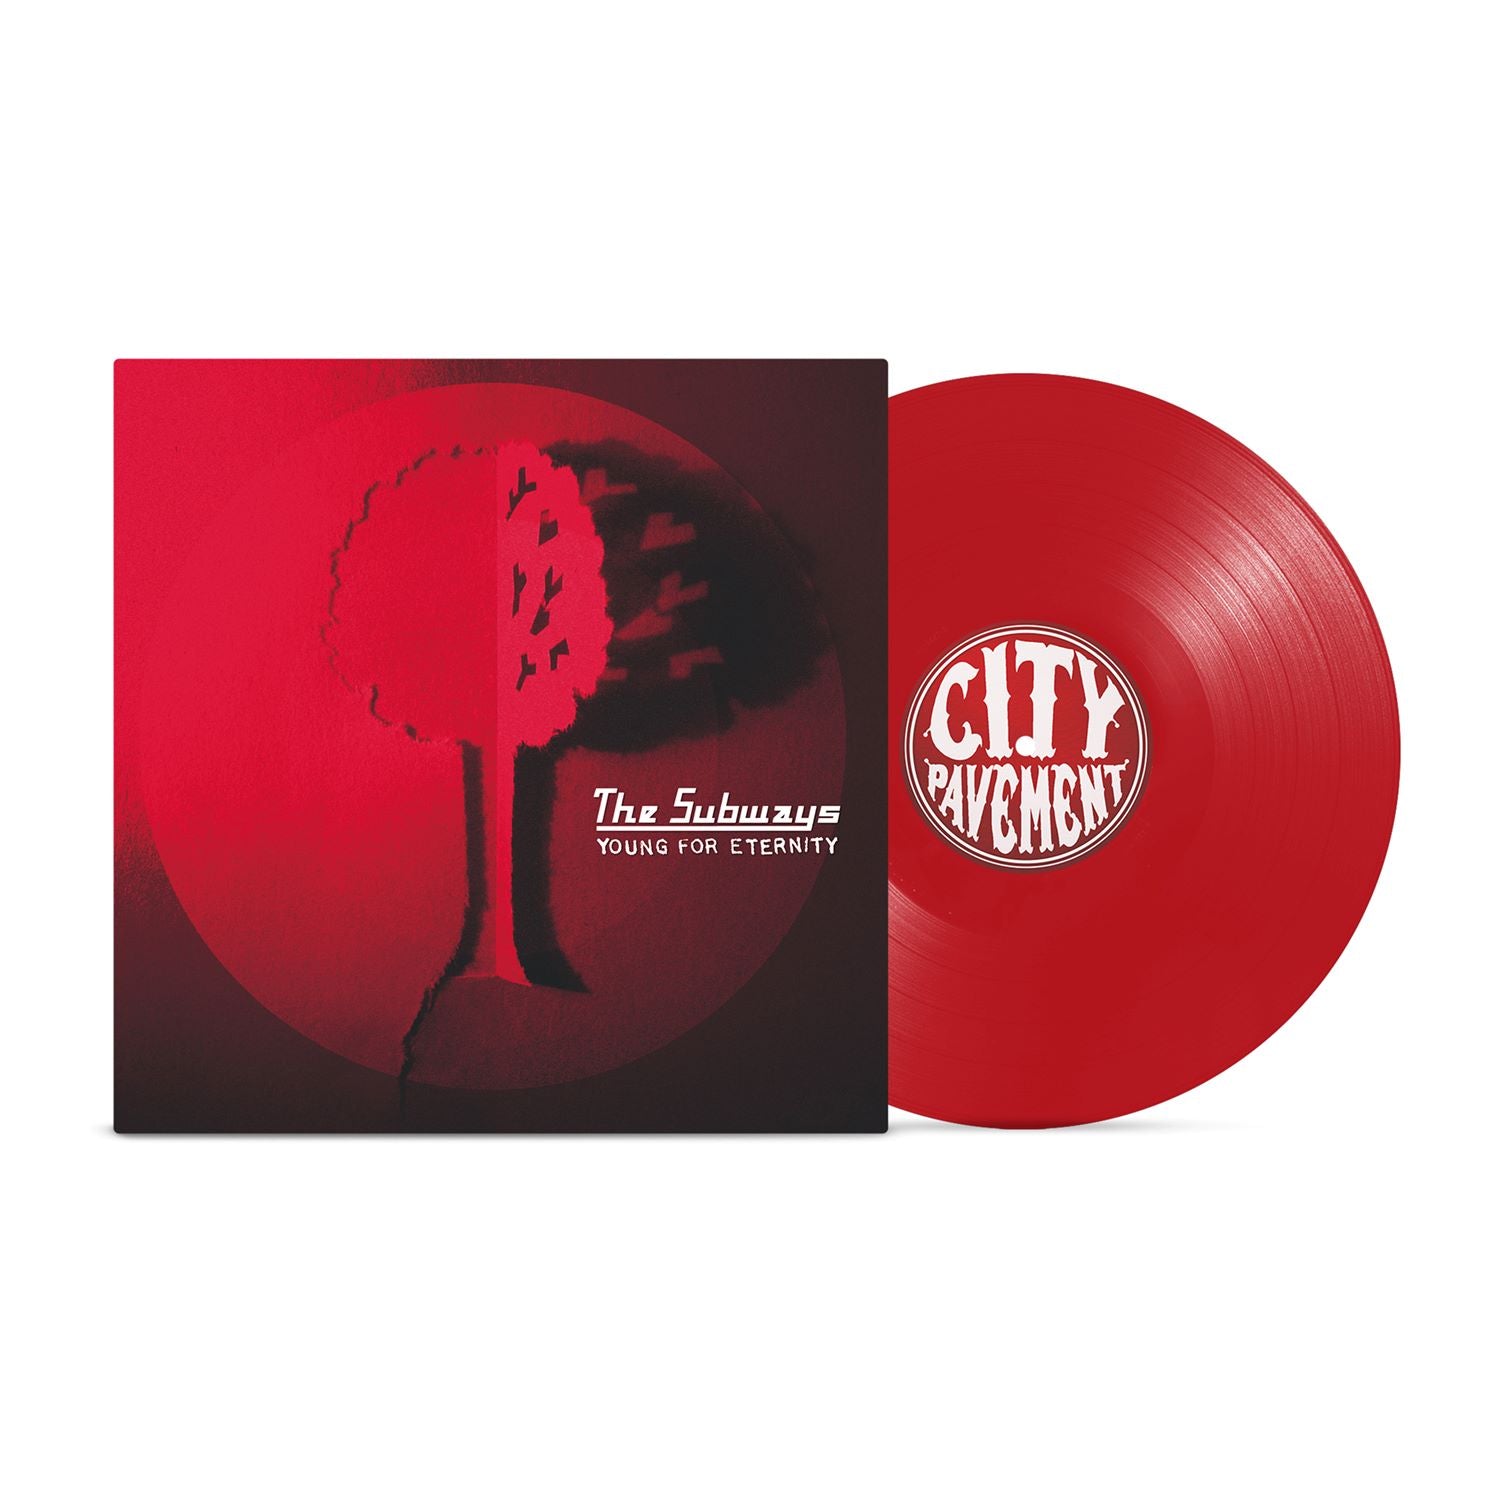 The Subways - Young for Eternity: Limited Transparent Red Vinyl LP